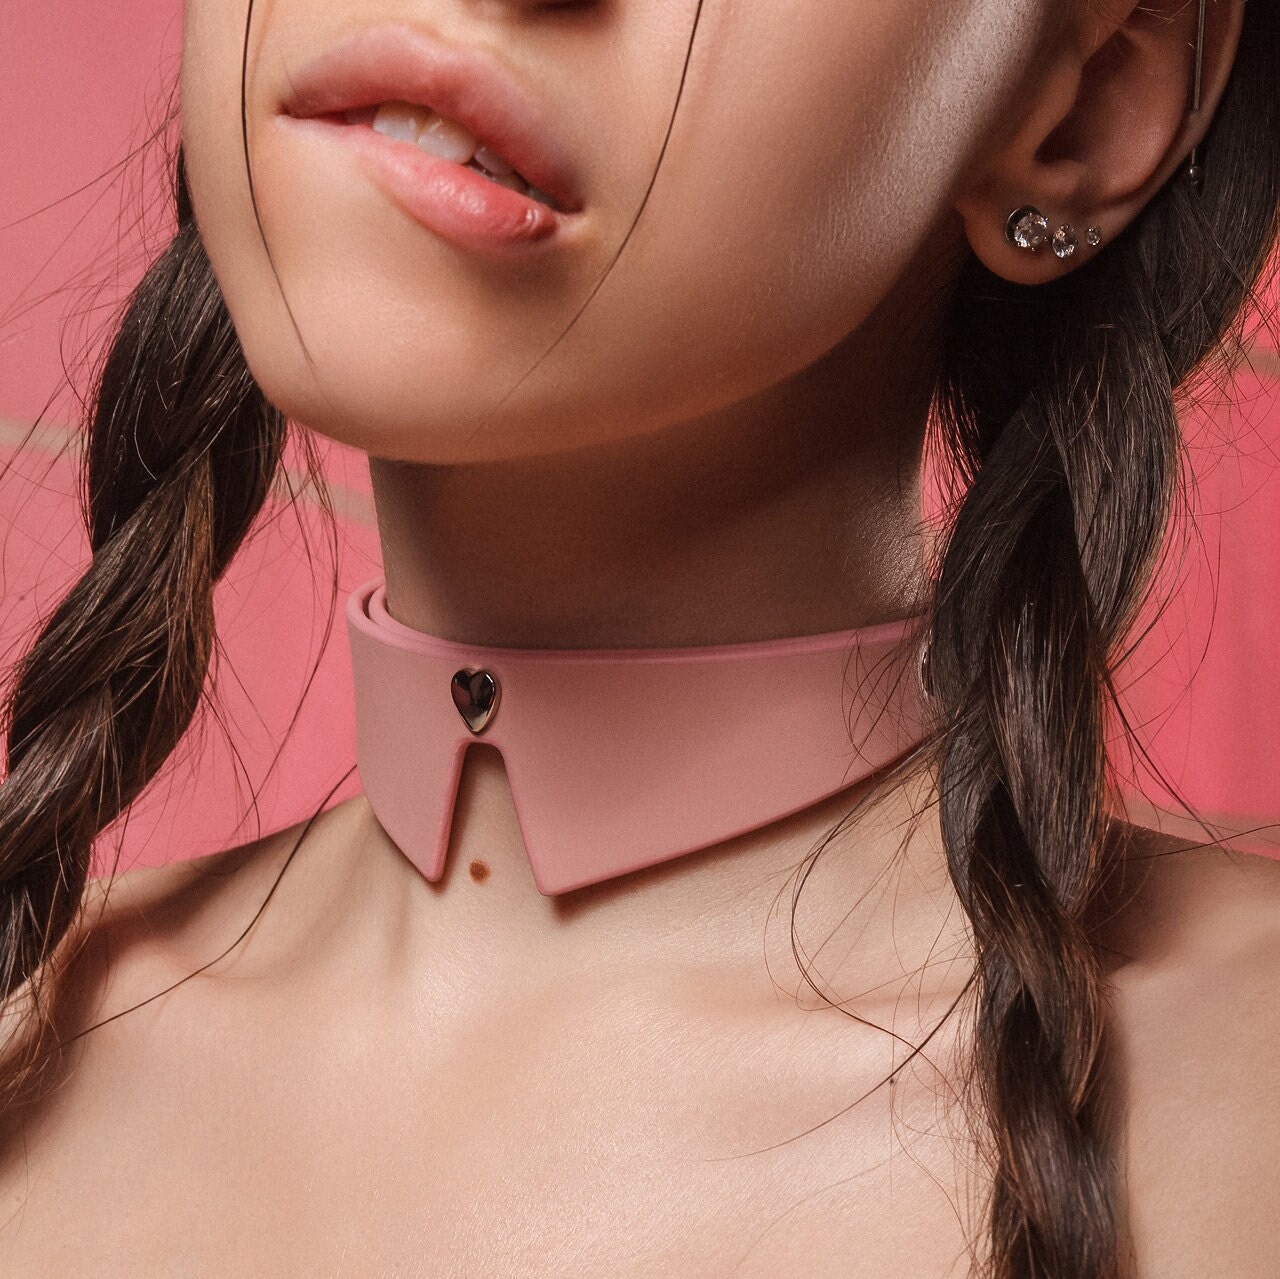 Choker Extenders Snap Buckle Extension for Large Neck Collar 